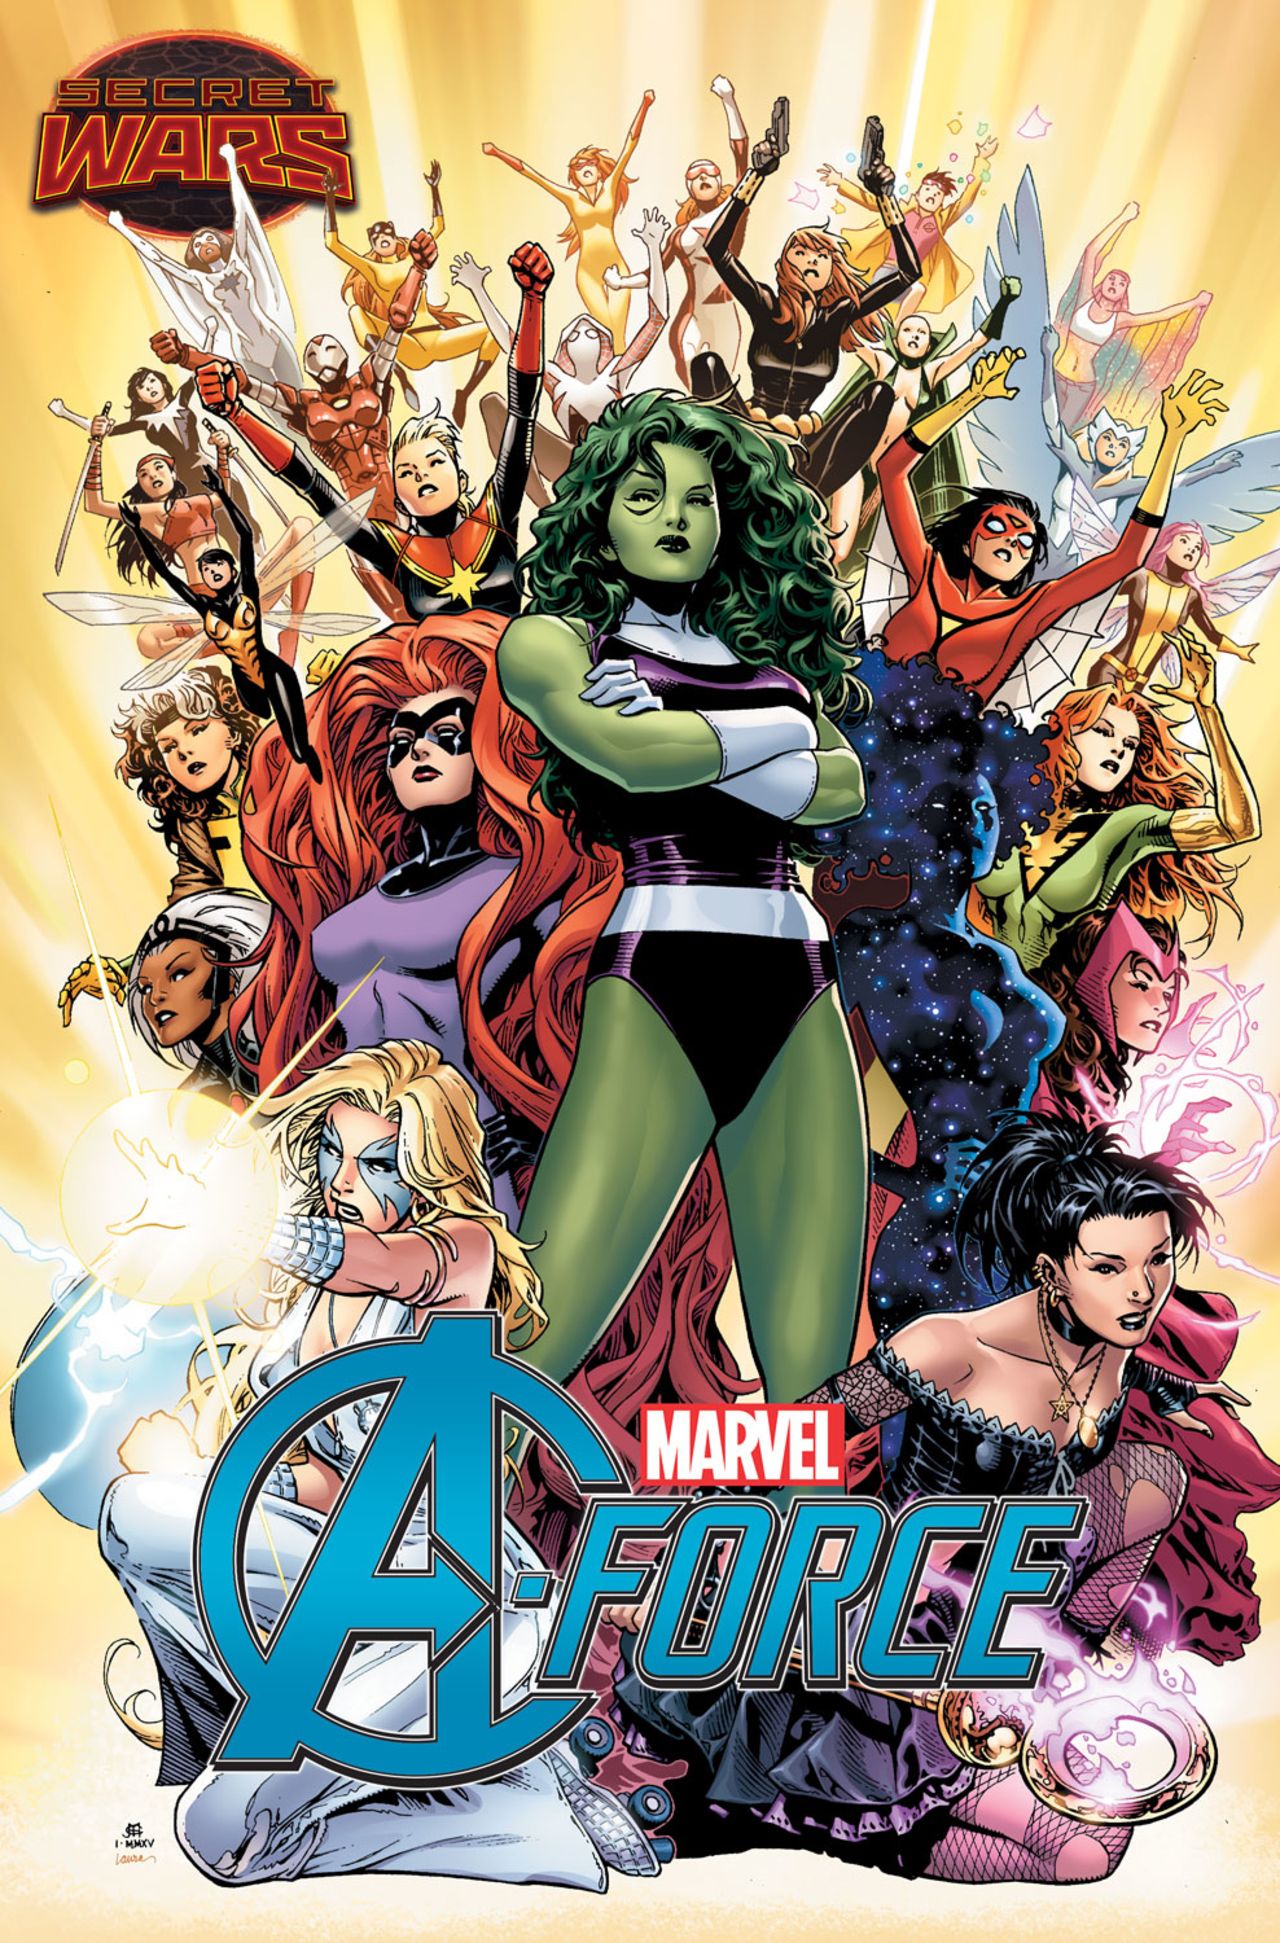 Marvel Comics announced it will replace all Avengers teams with a new one, composed entirely of women like She-Hulk, Medusa and Dazzler. "The A-Force" comic book hits stores in May.